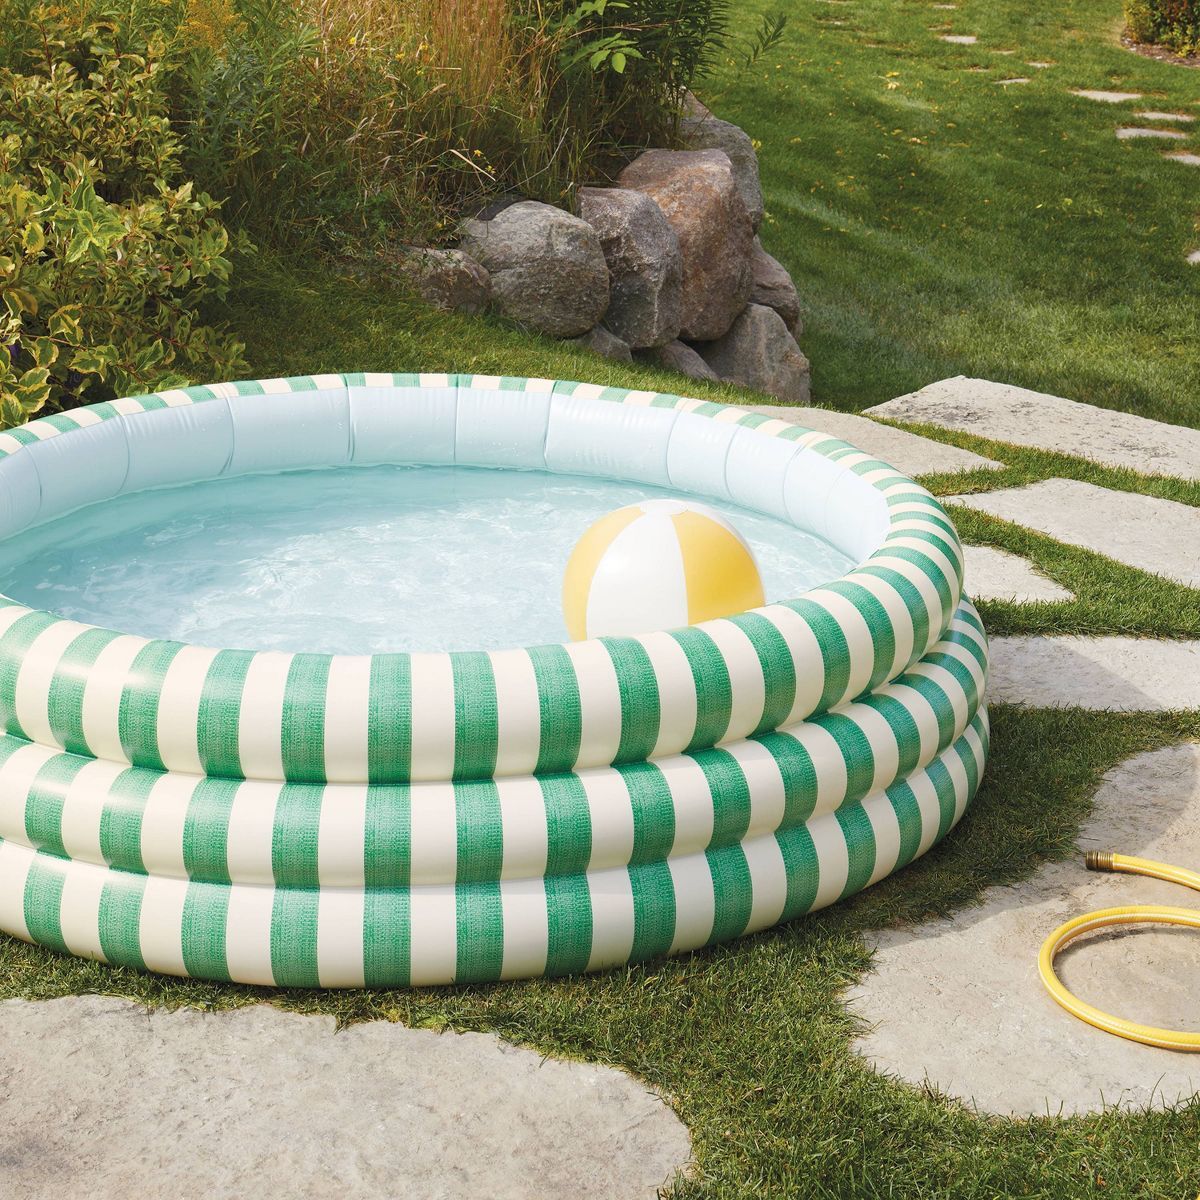 66" Bold Stripe Inflatable Pool Cream/Light Blue/Green - Hearth & Hand™ with Magnolia | Target